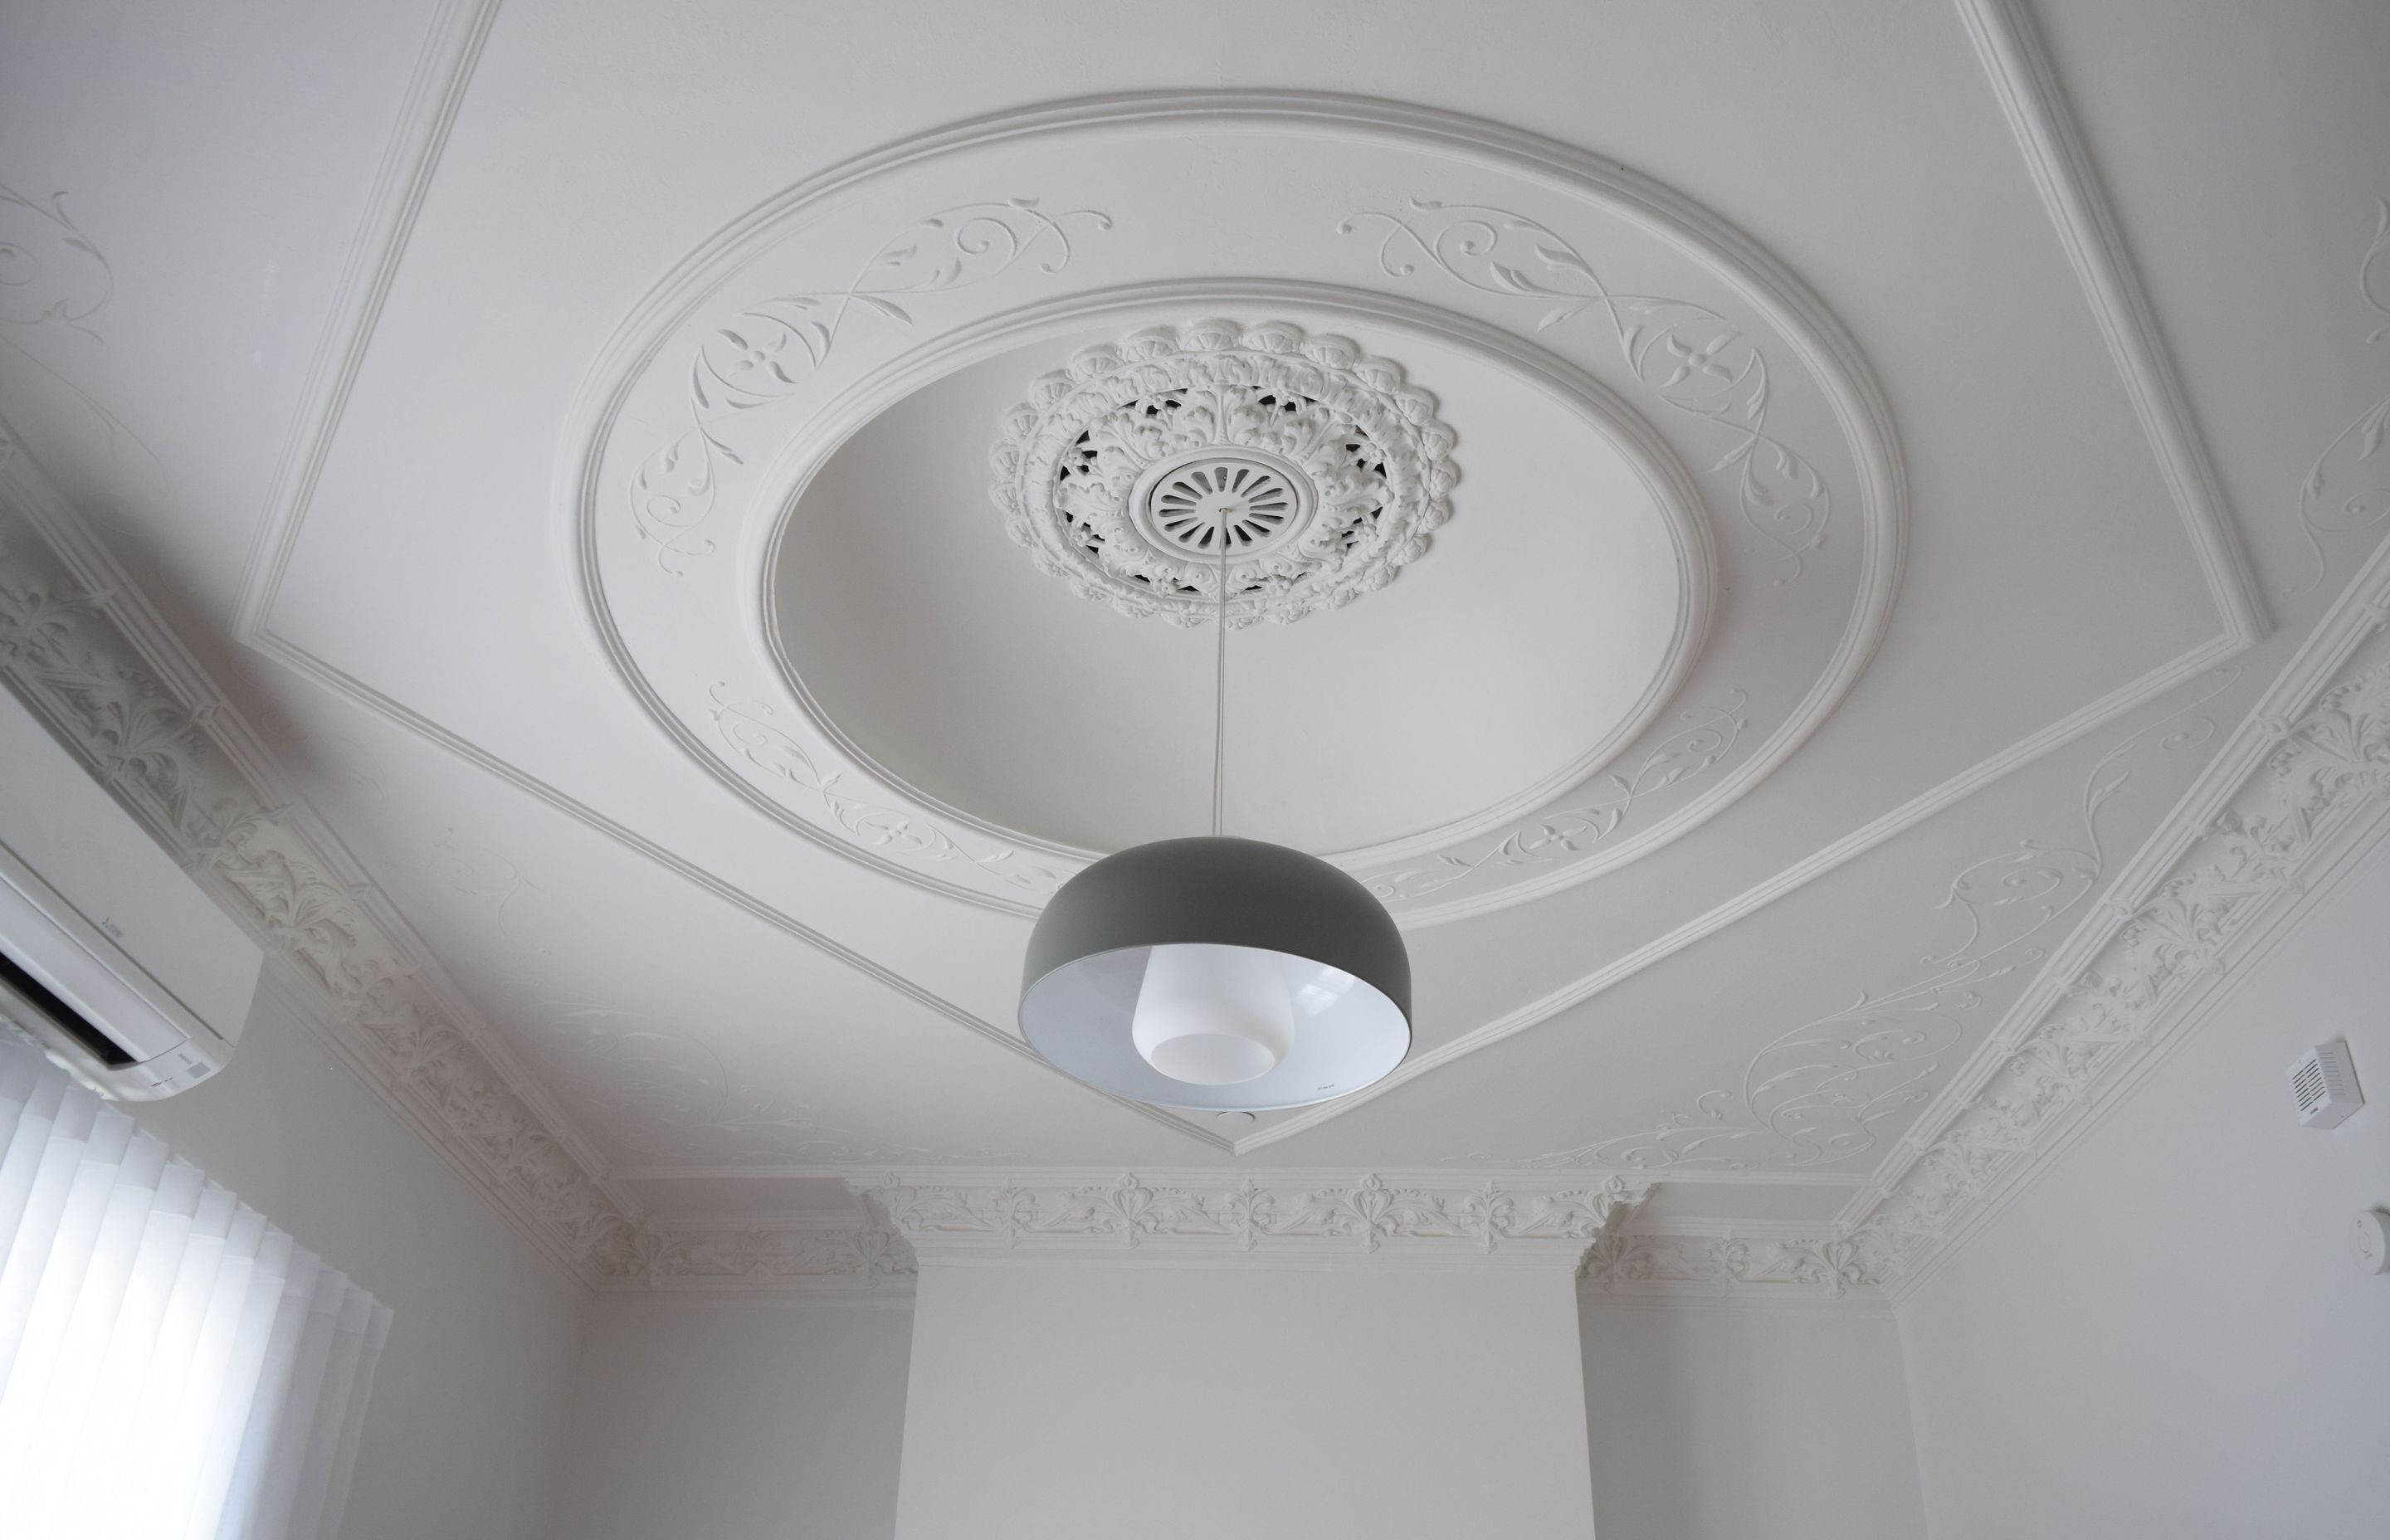 The beautifully detailed ceiling was restored with careful attention from the painter.